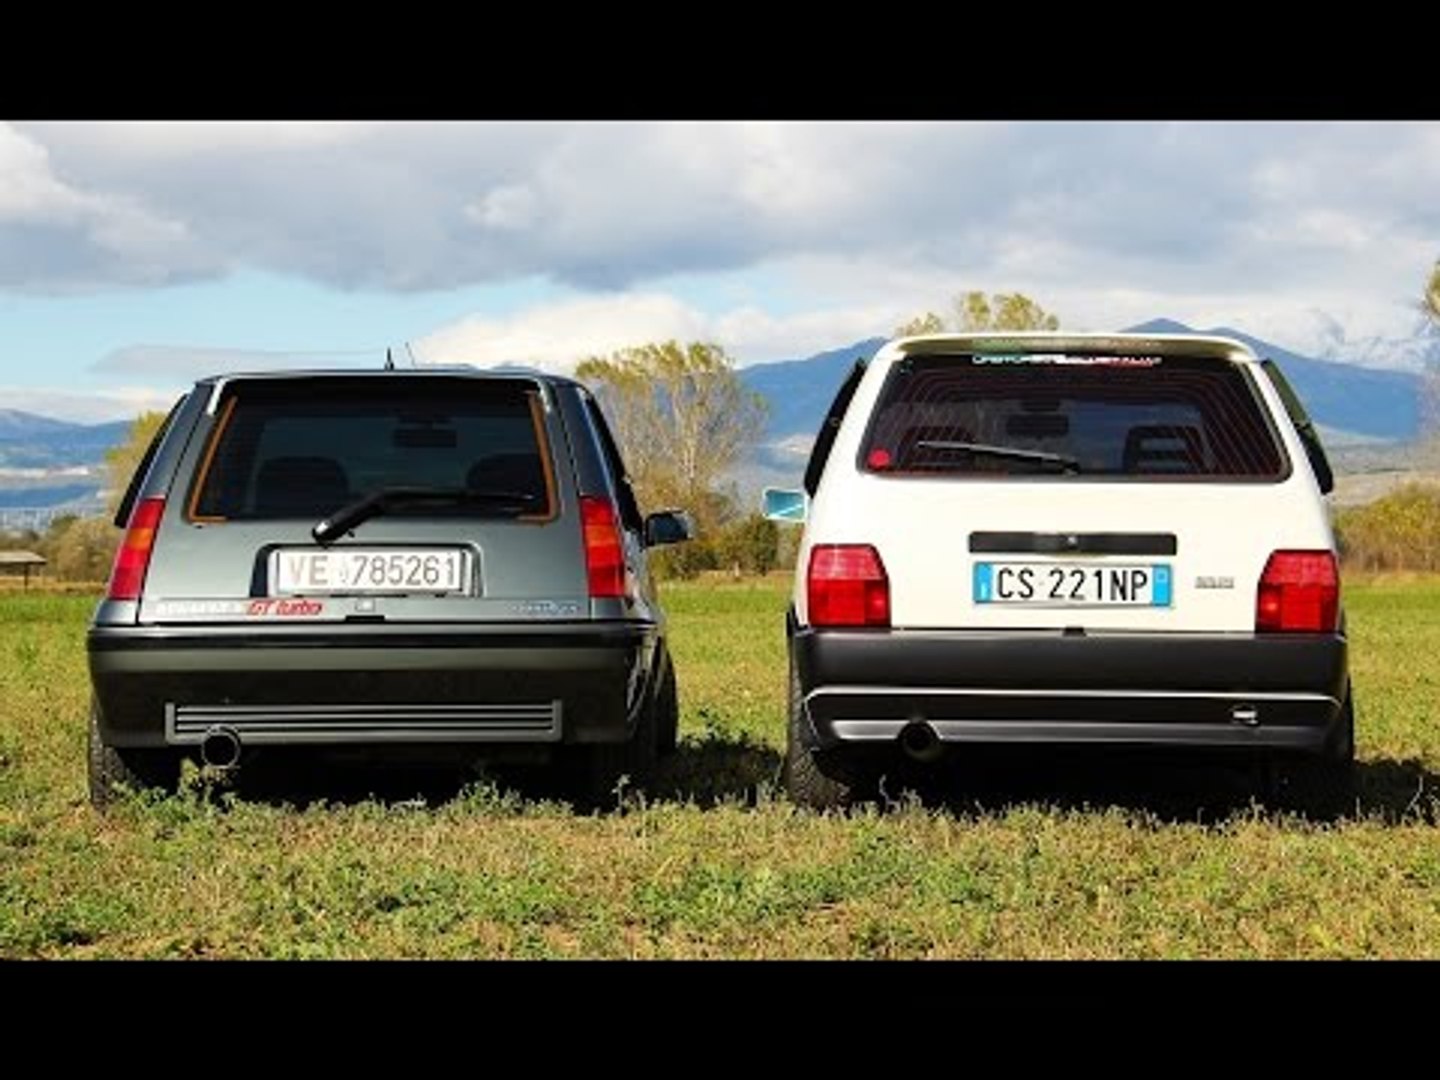 Fiat Uno Turbo vs Renault 5 Gt Turbo - Davide Cironi drive experience  (ENG.SUBS) - Video Dailymotion